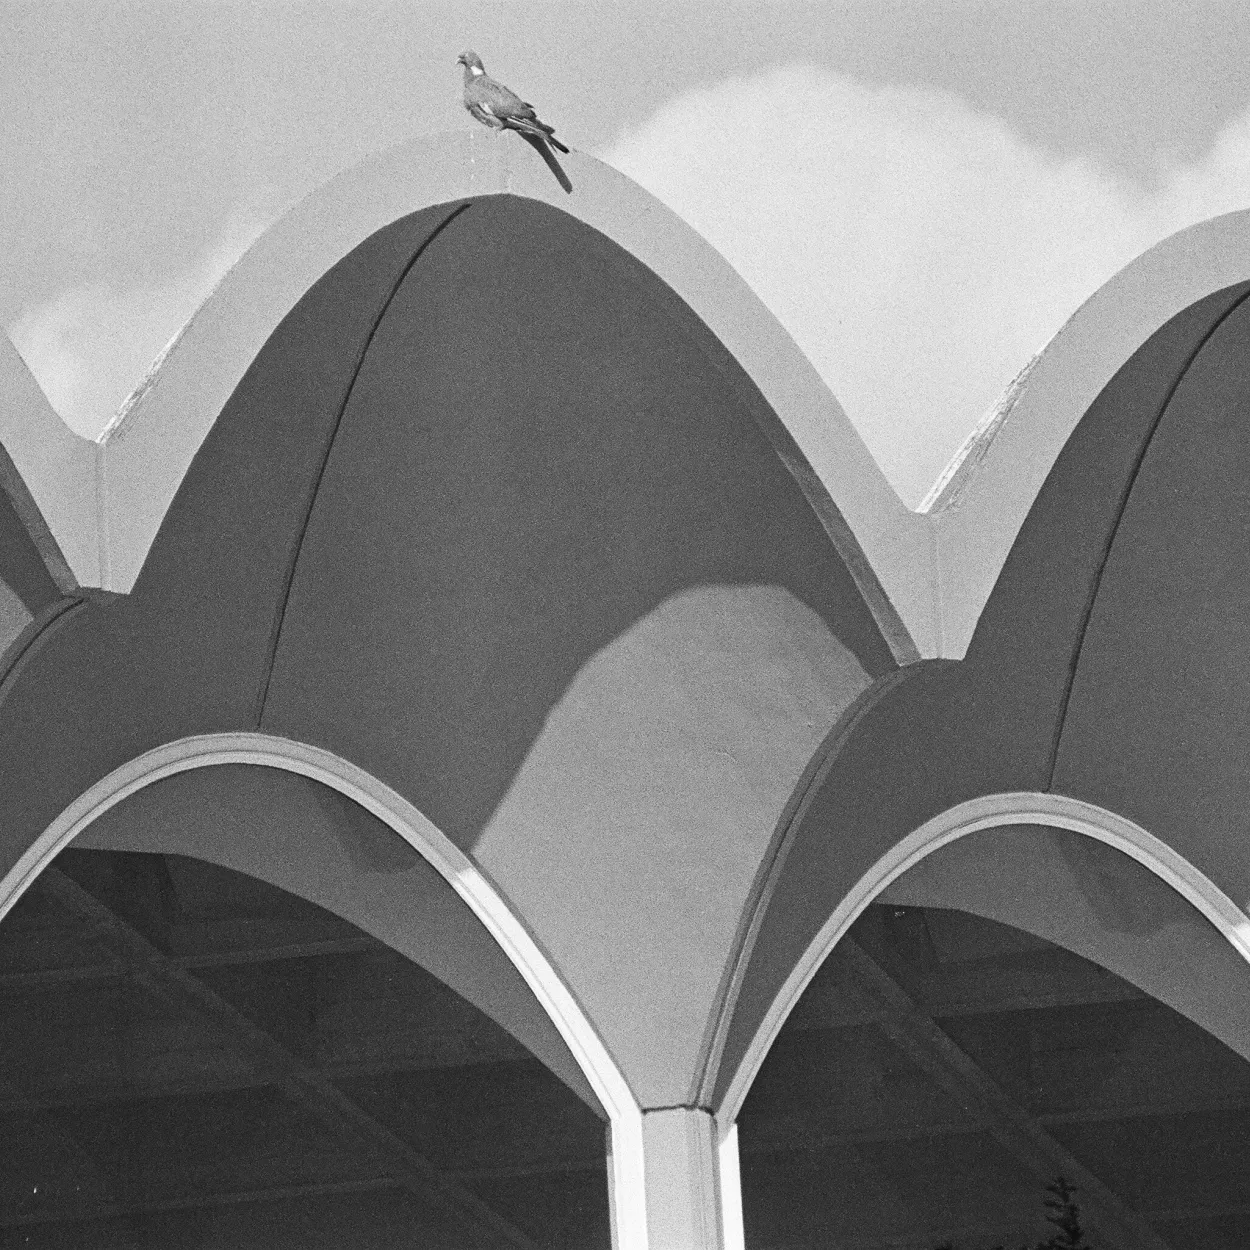 Greyscale image of the Lasdun roof with a pigeon